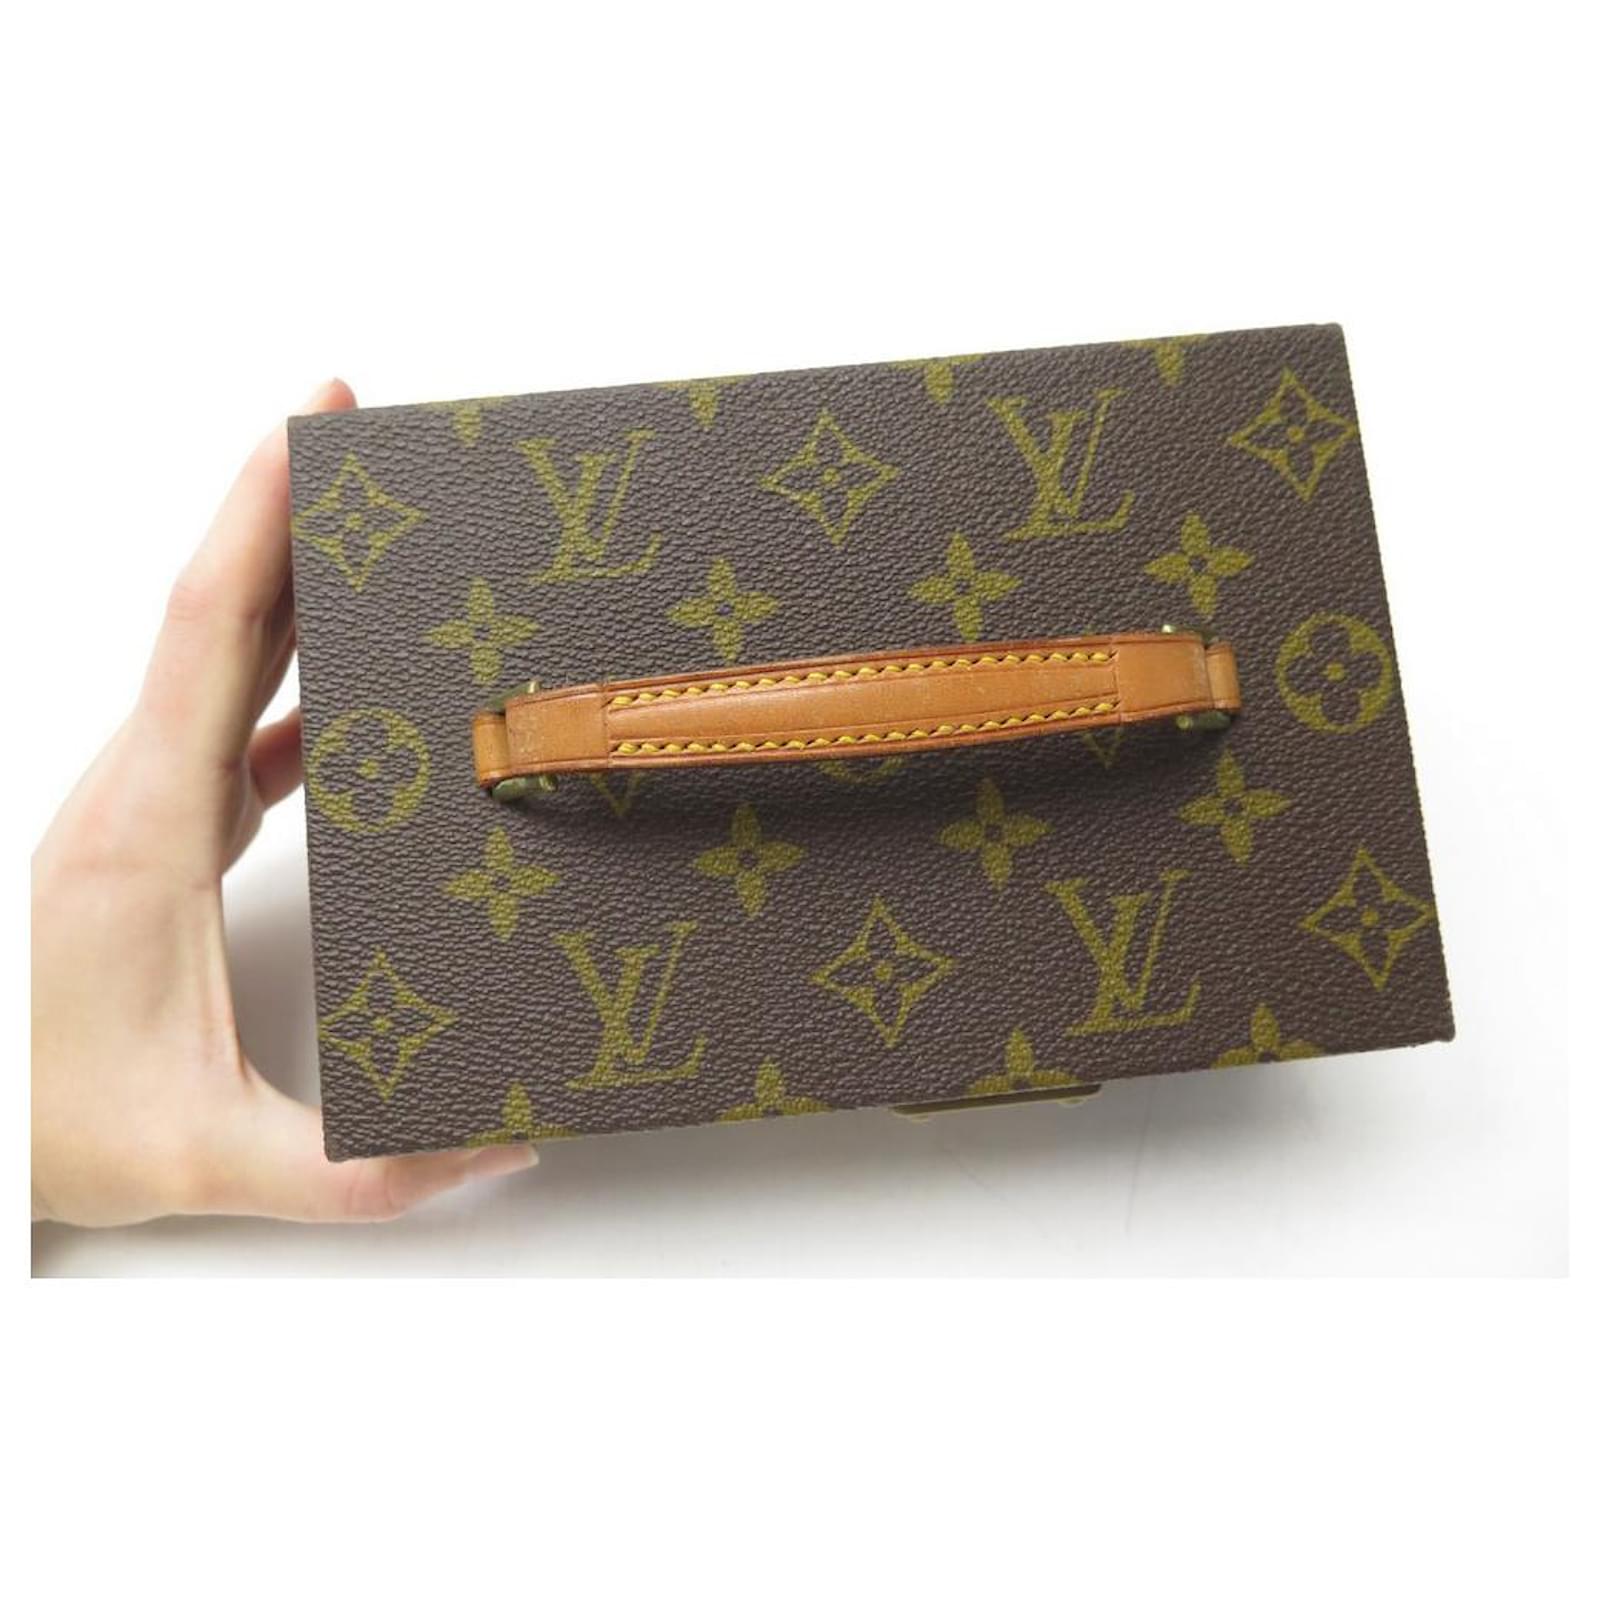 LOUIS VUITTON. Monogram leather and canvas jewellery box…